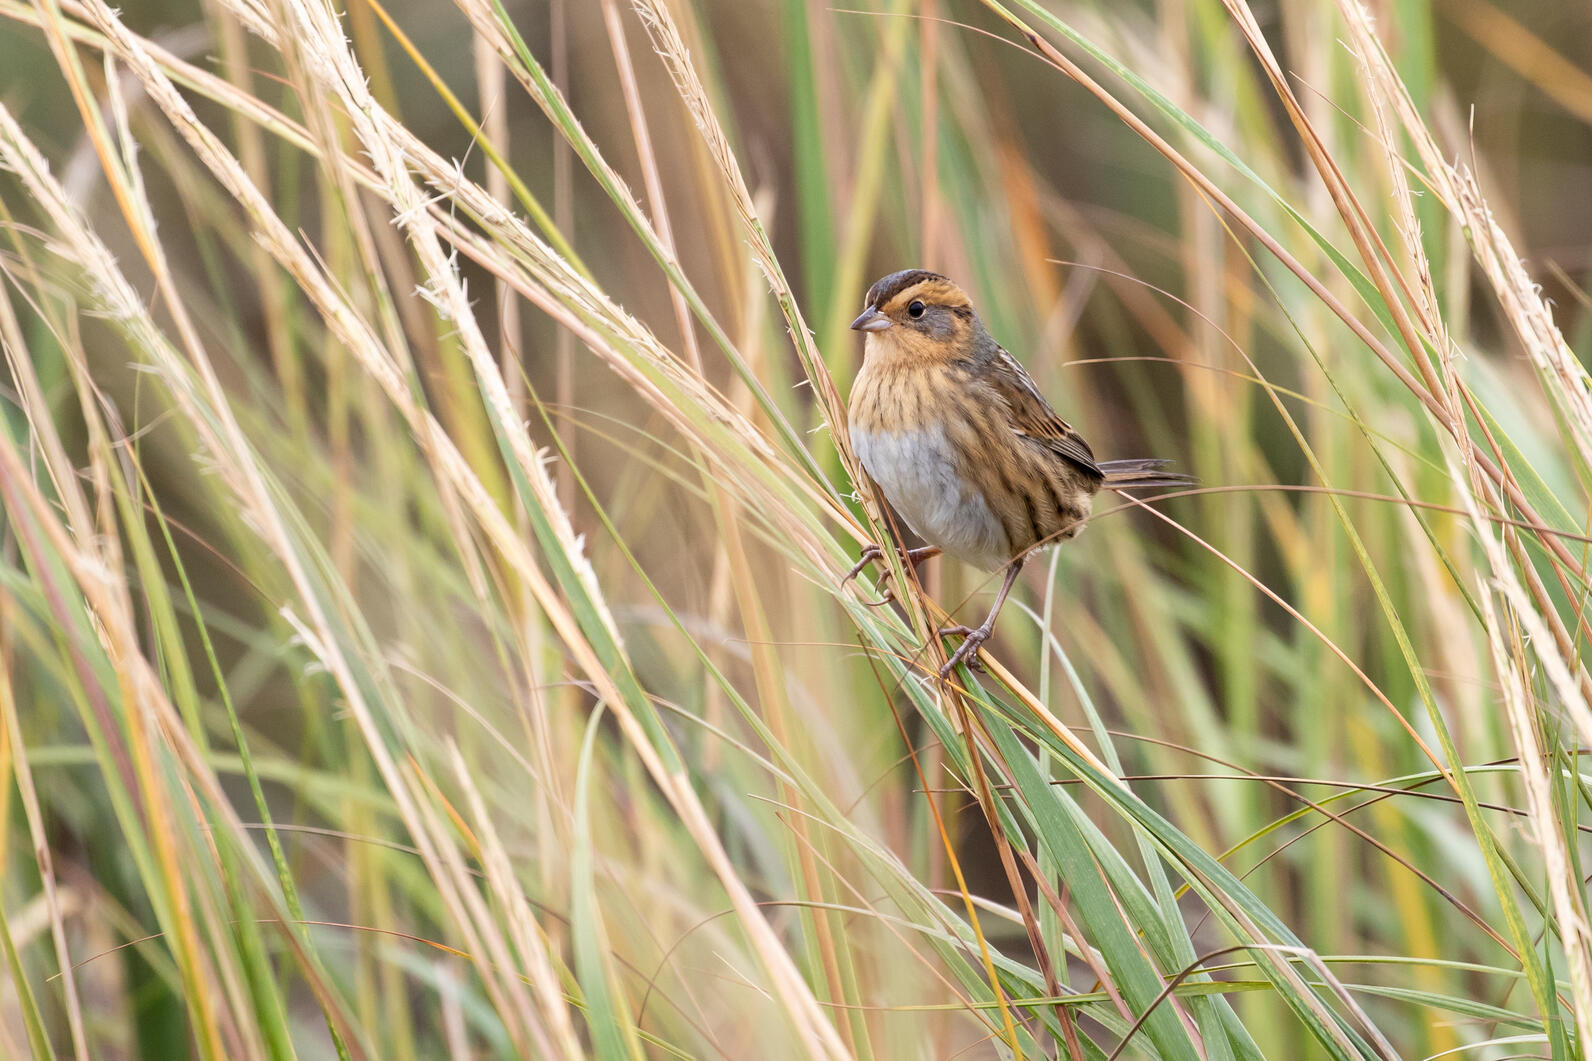 A gray and orange sparrow perches on marsh grass.